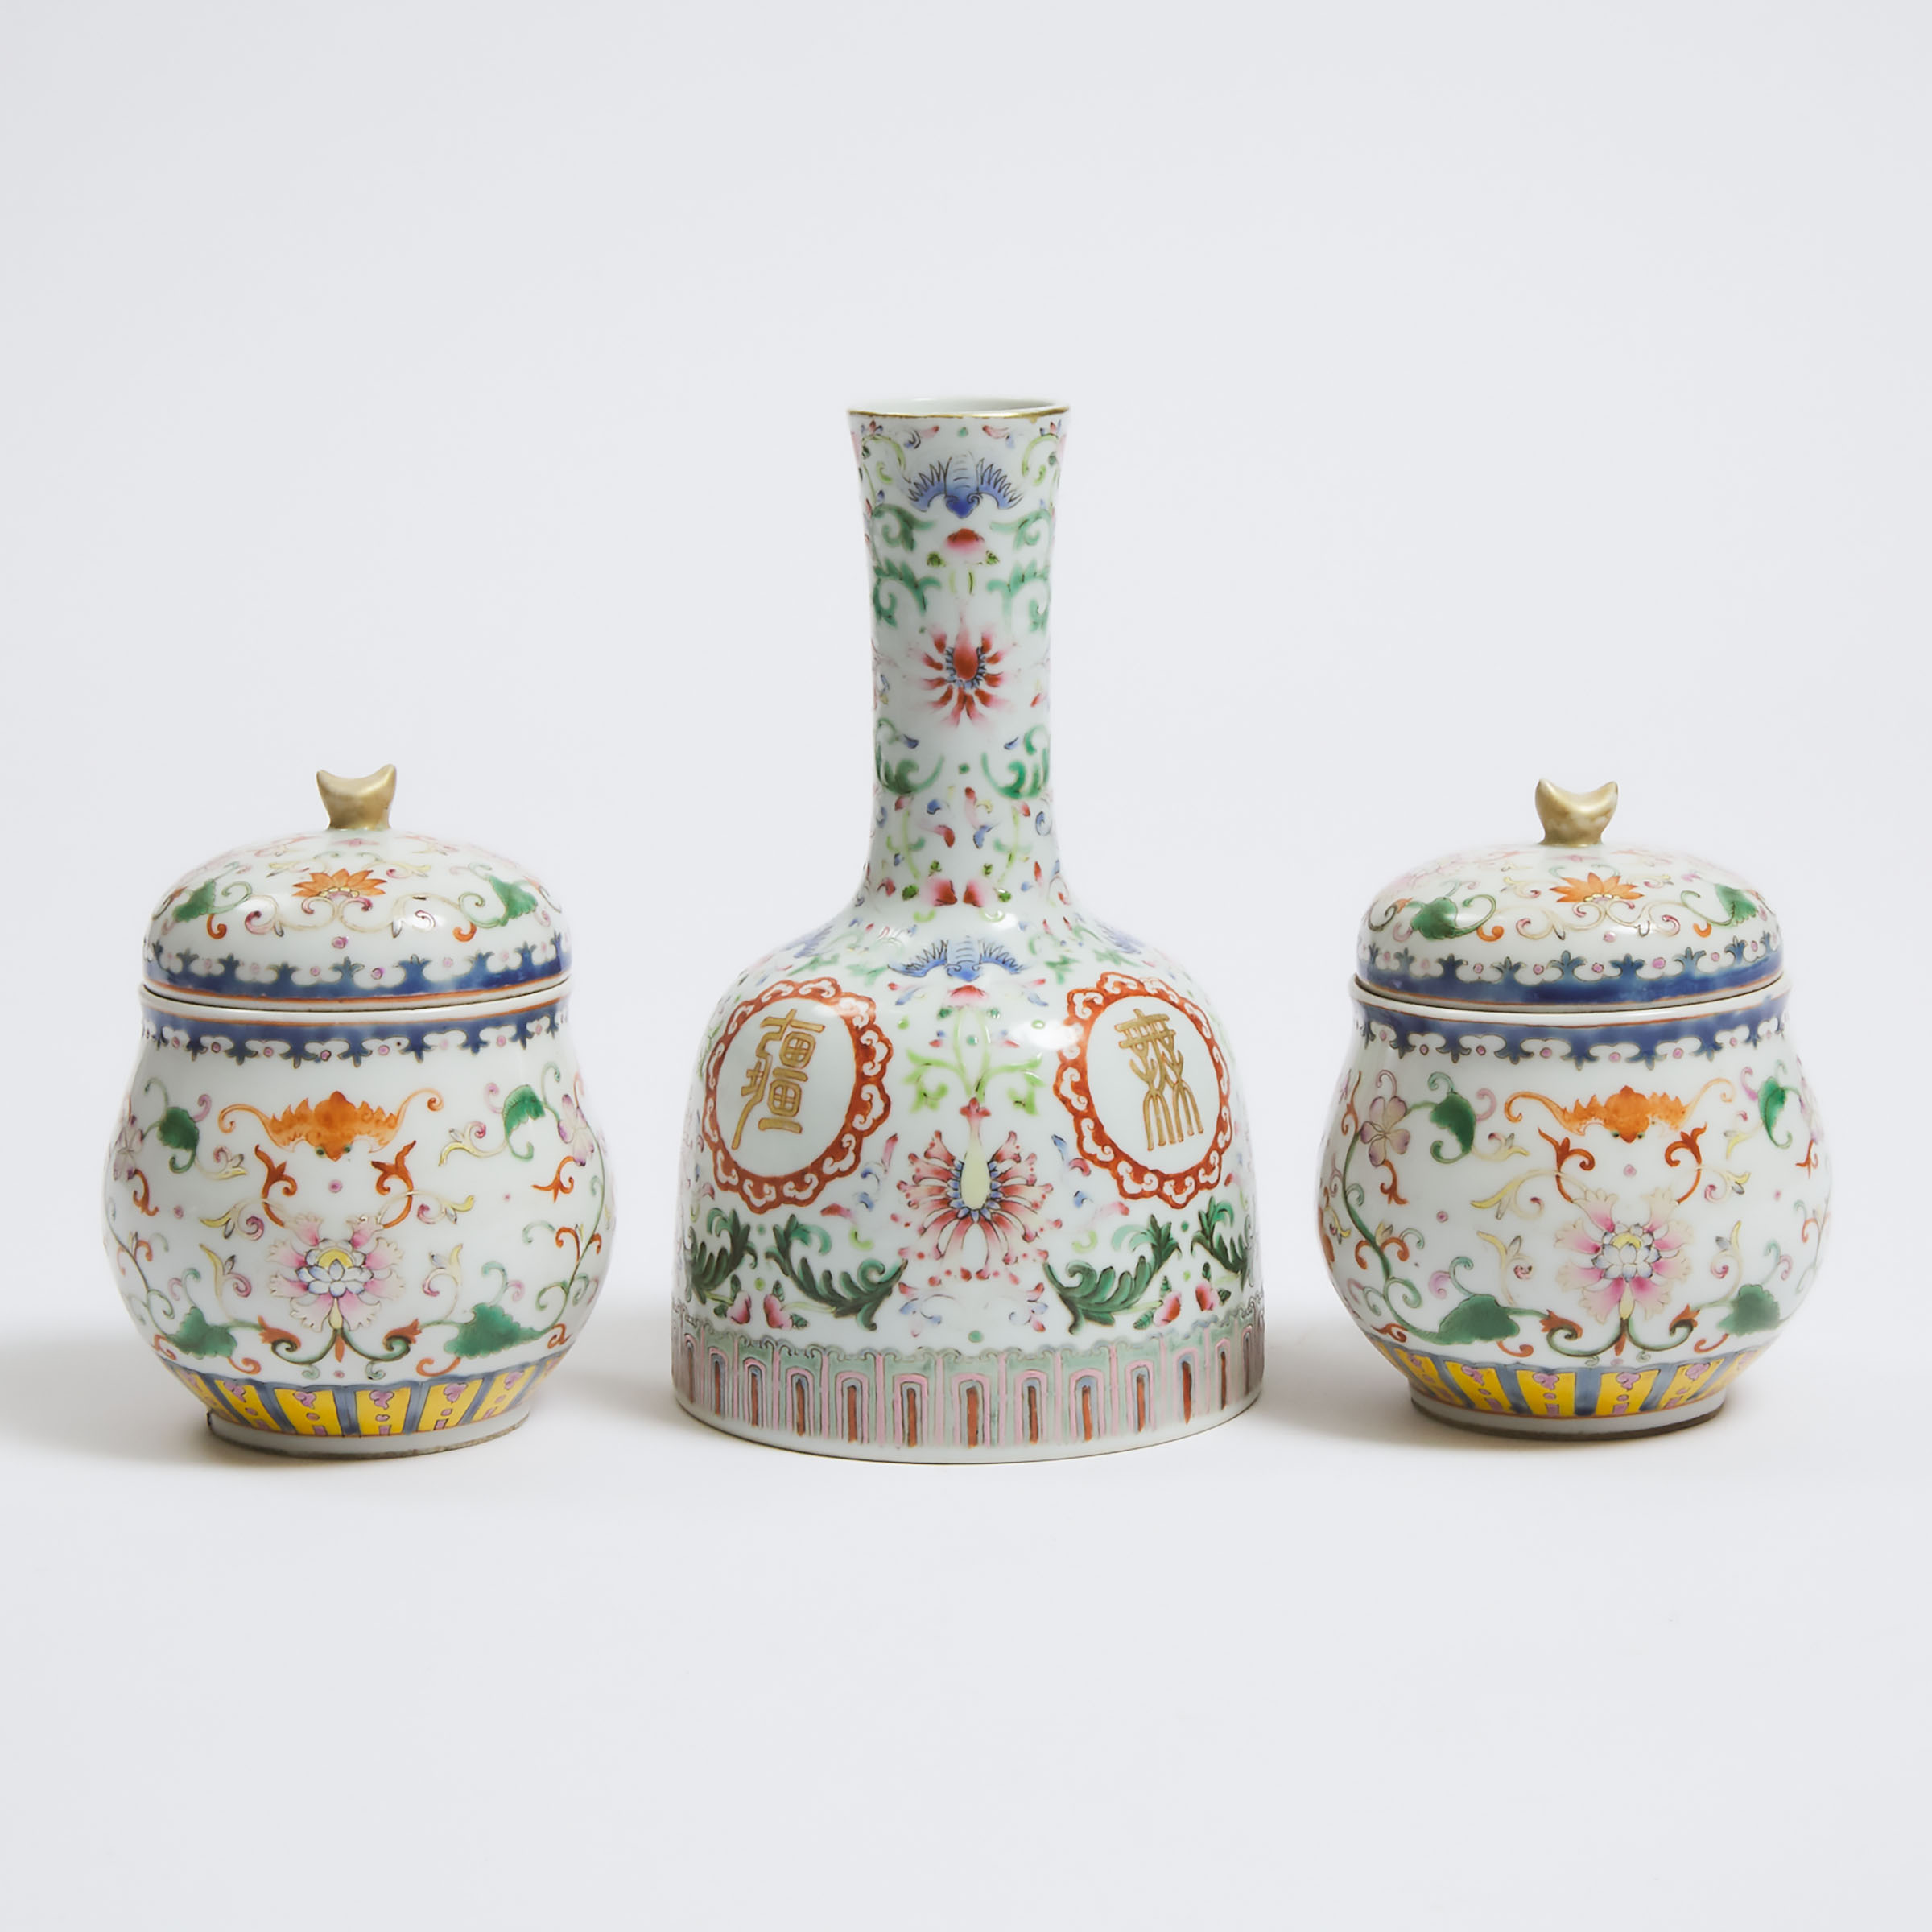 A Pair of Famille Rose Wine Cup Warmers, Together With a Mallet Vase, Qing Dynasty, Late 19th Century